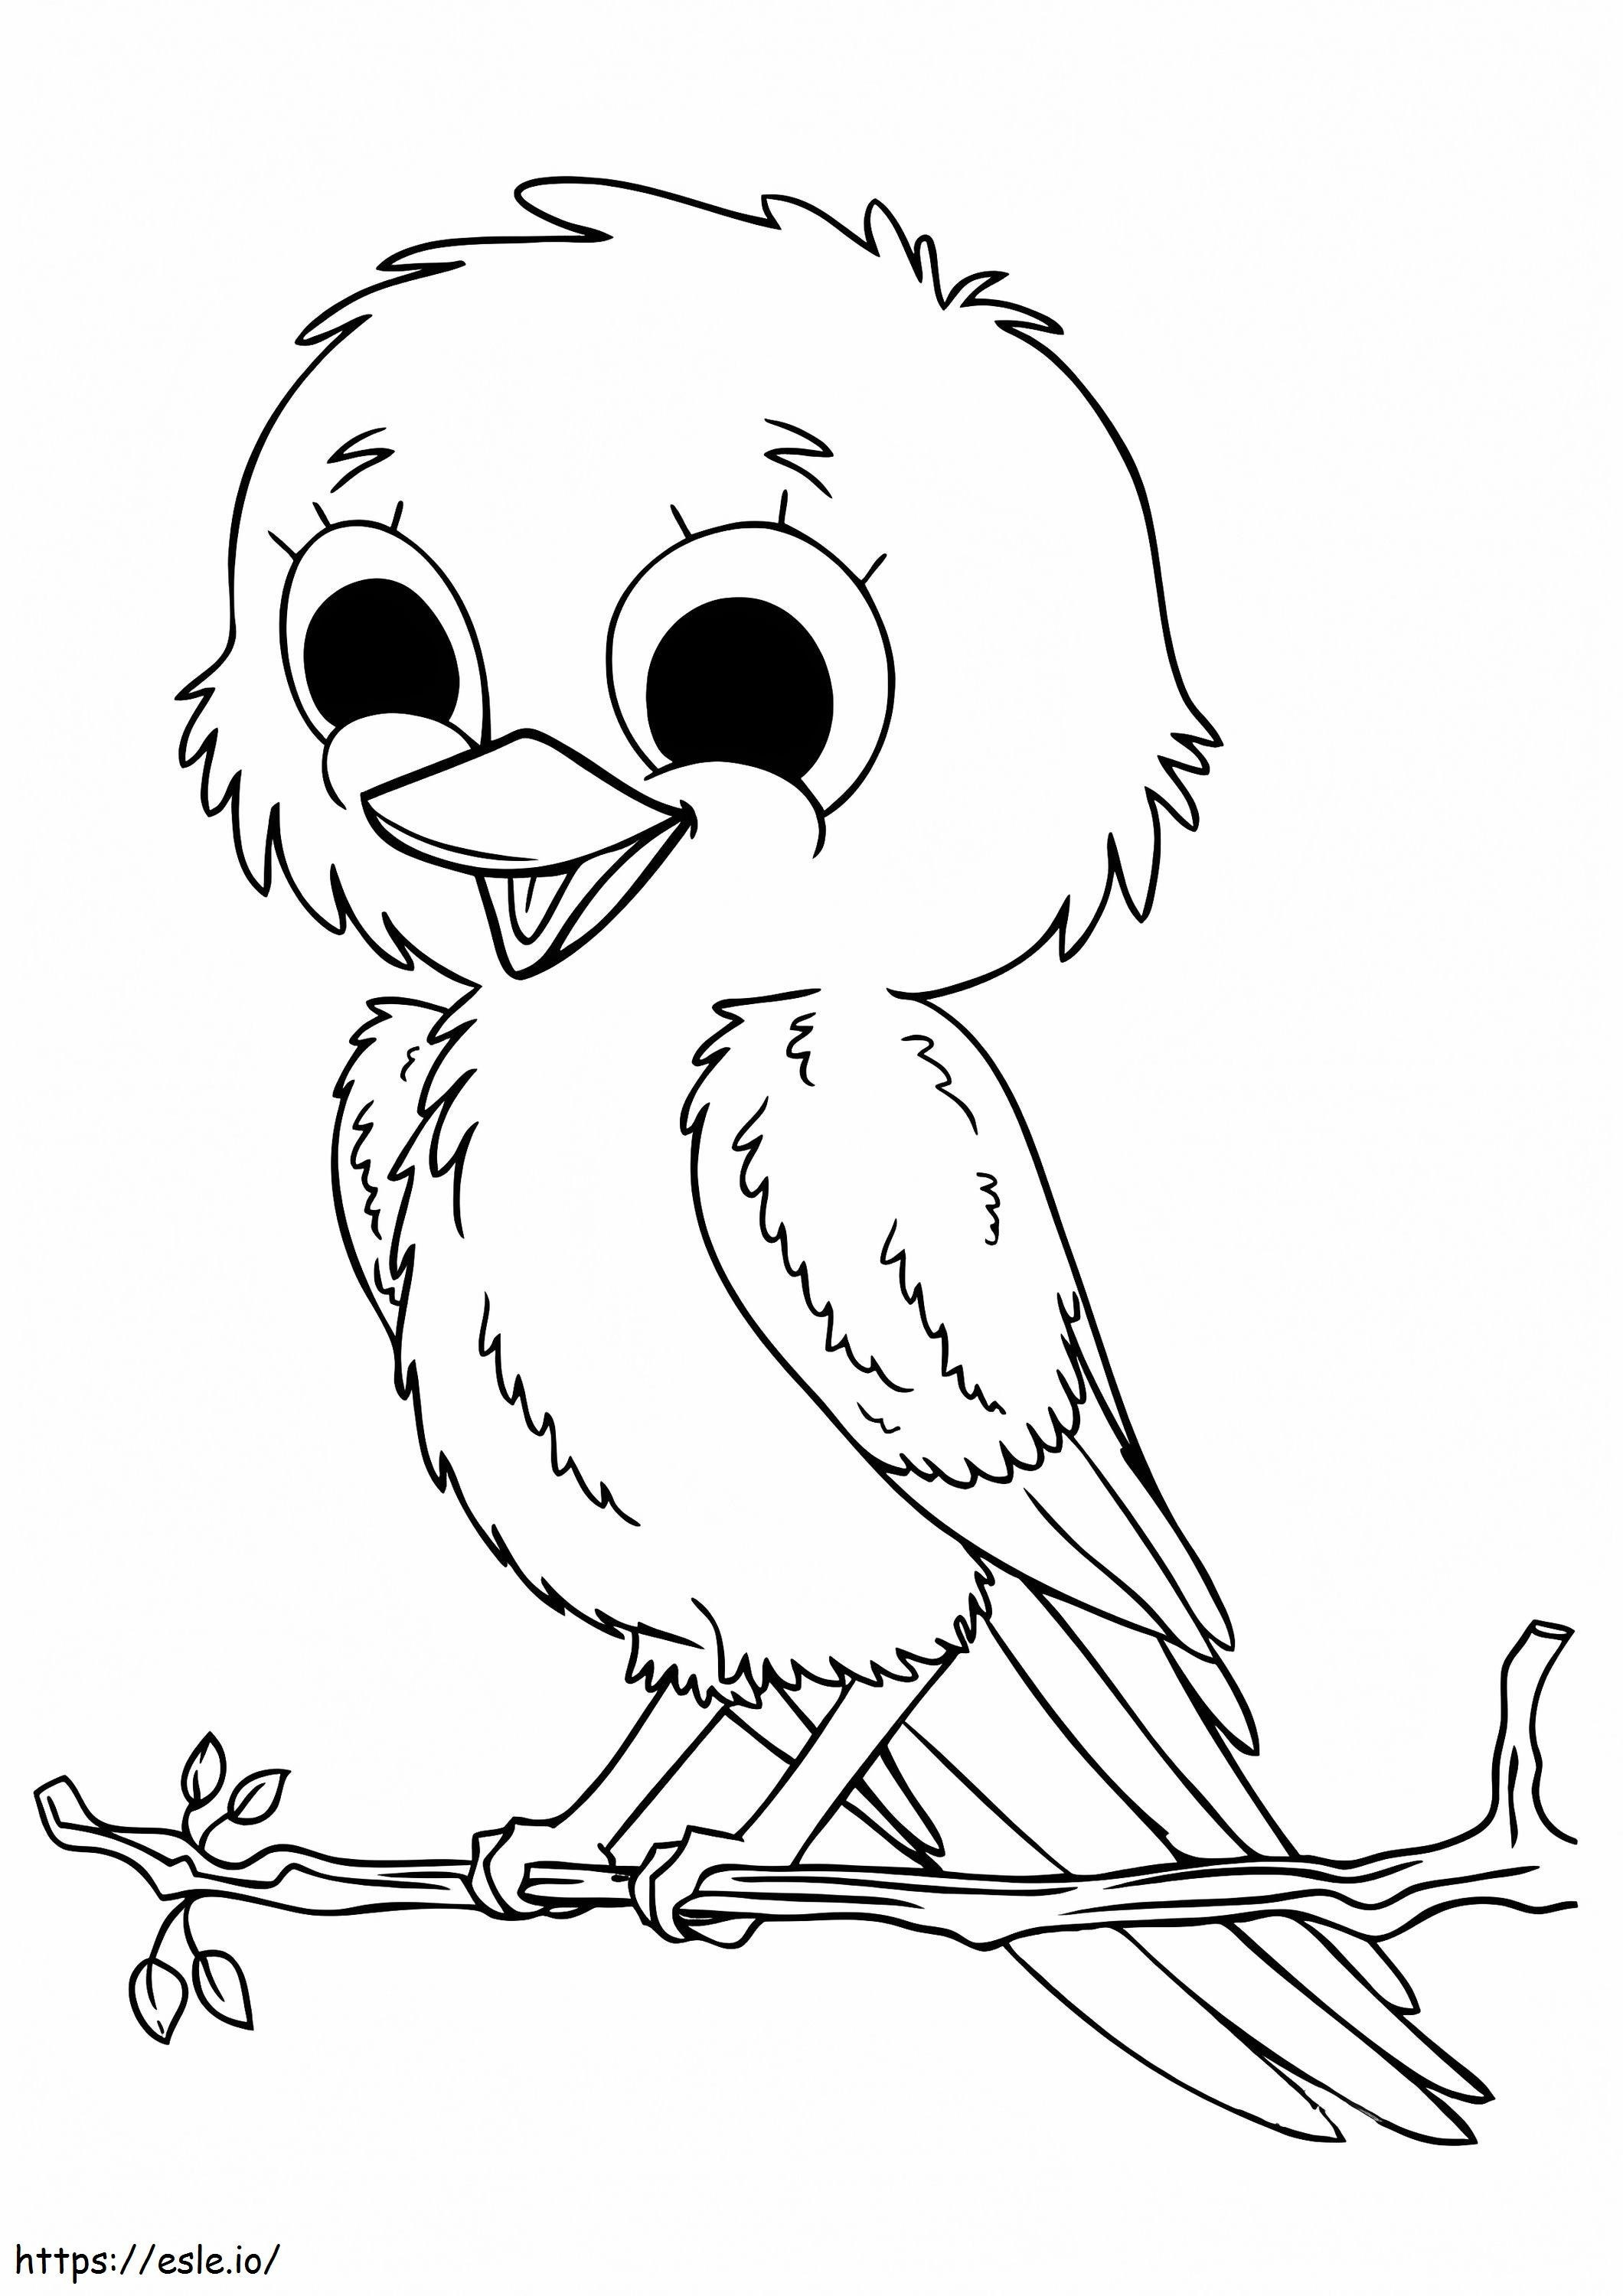 The Canary A4 coloring page